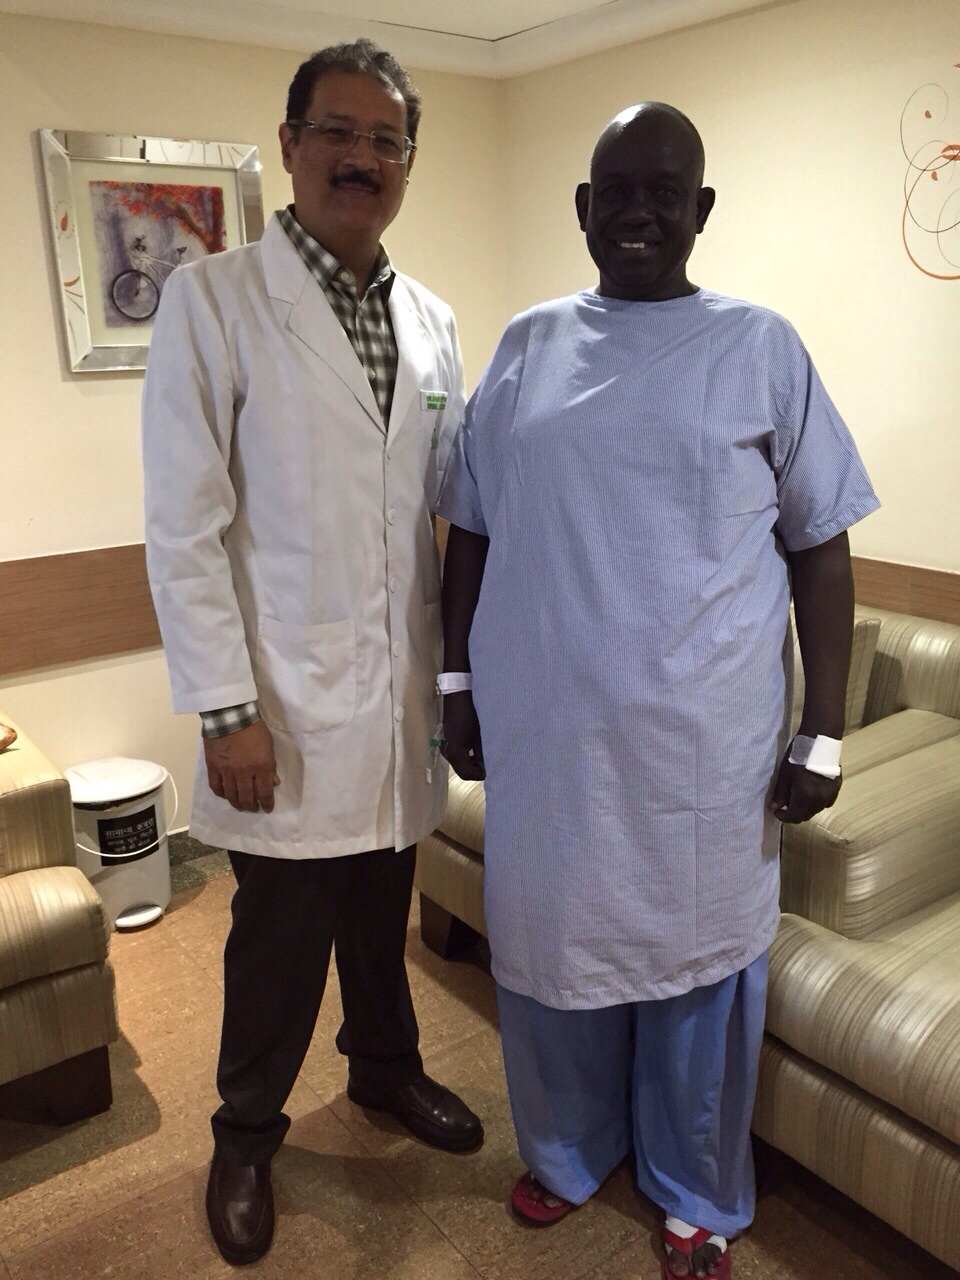 PR_Dr Wadhawan with the patient2